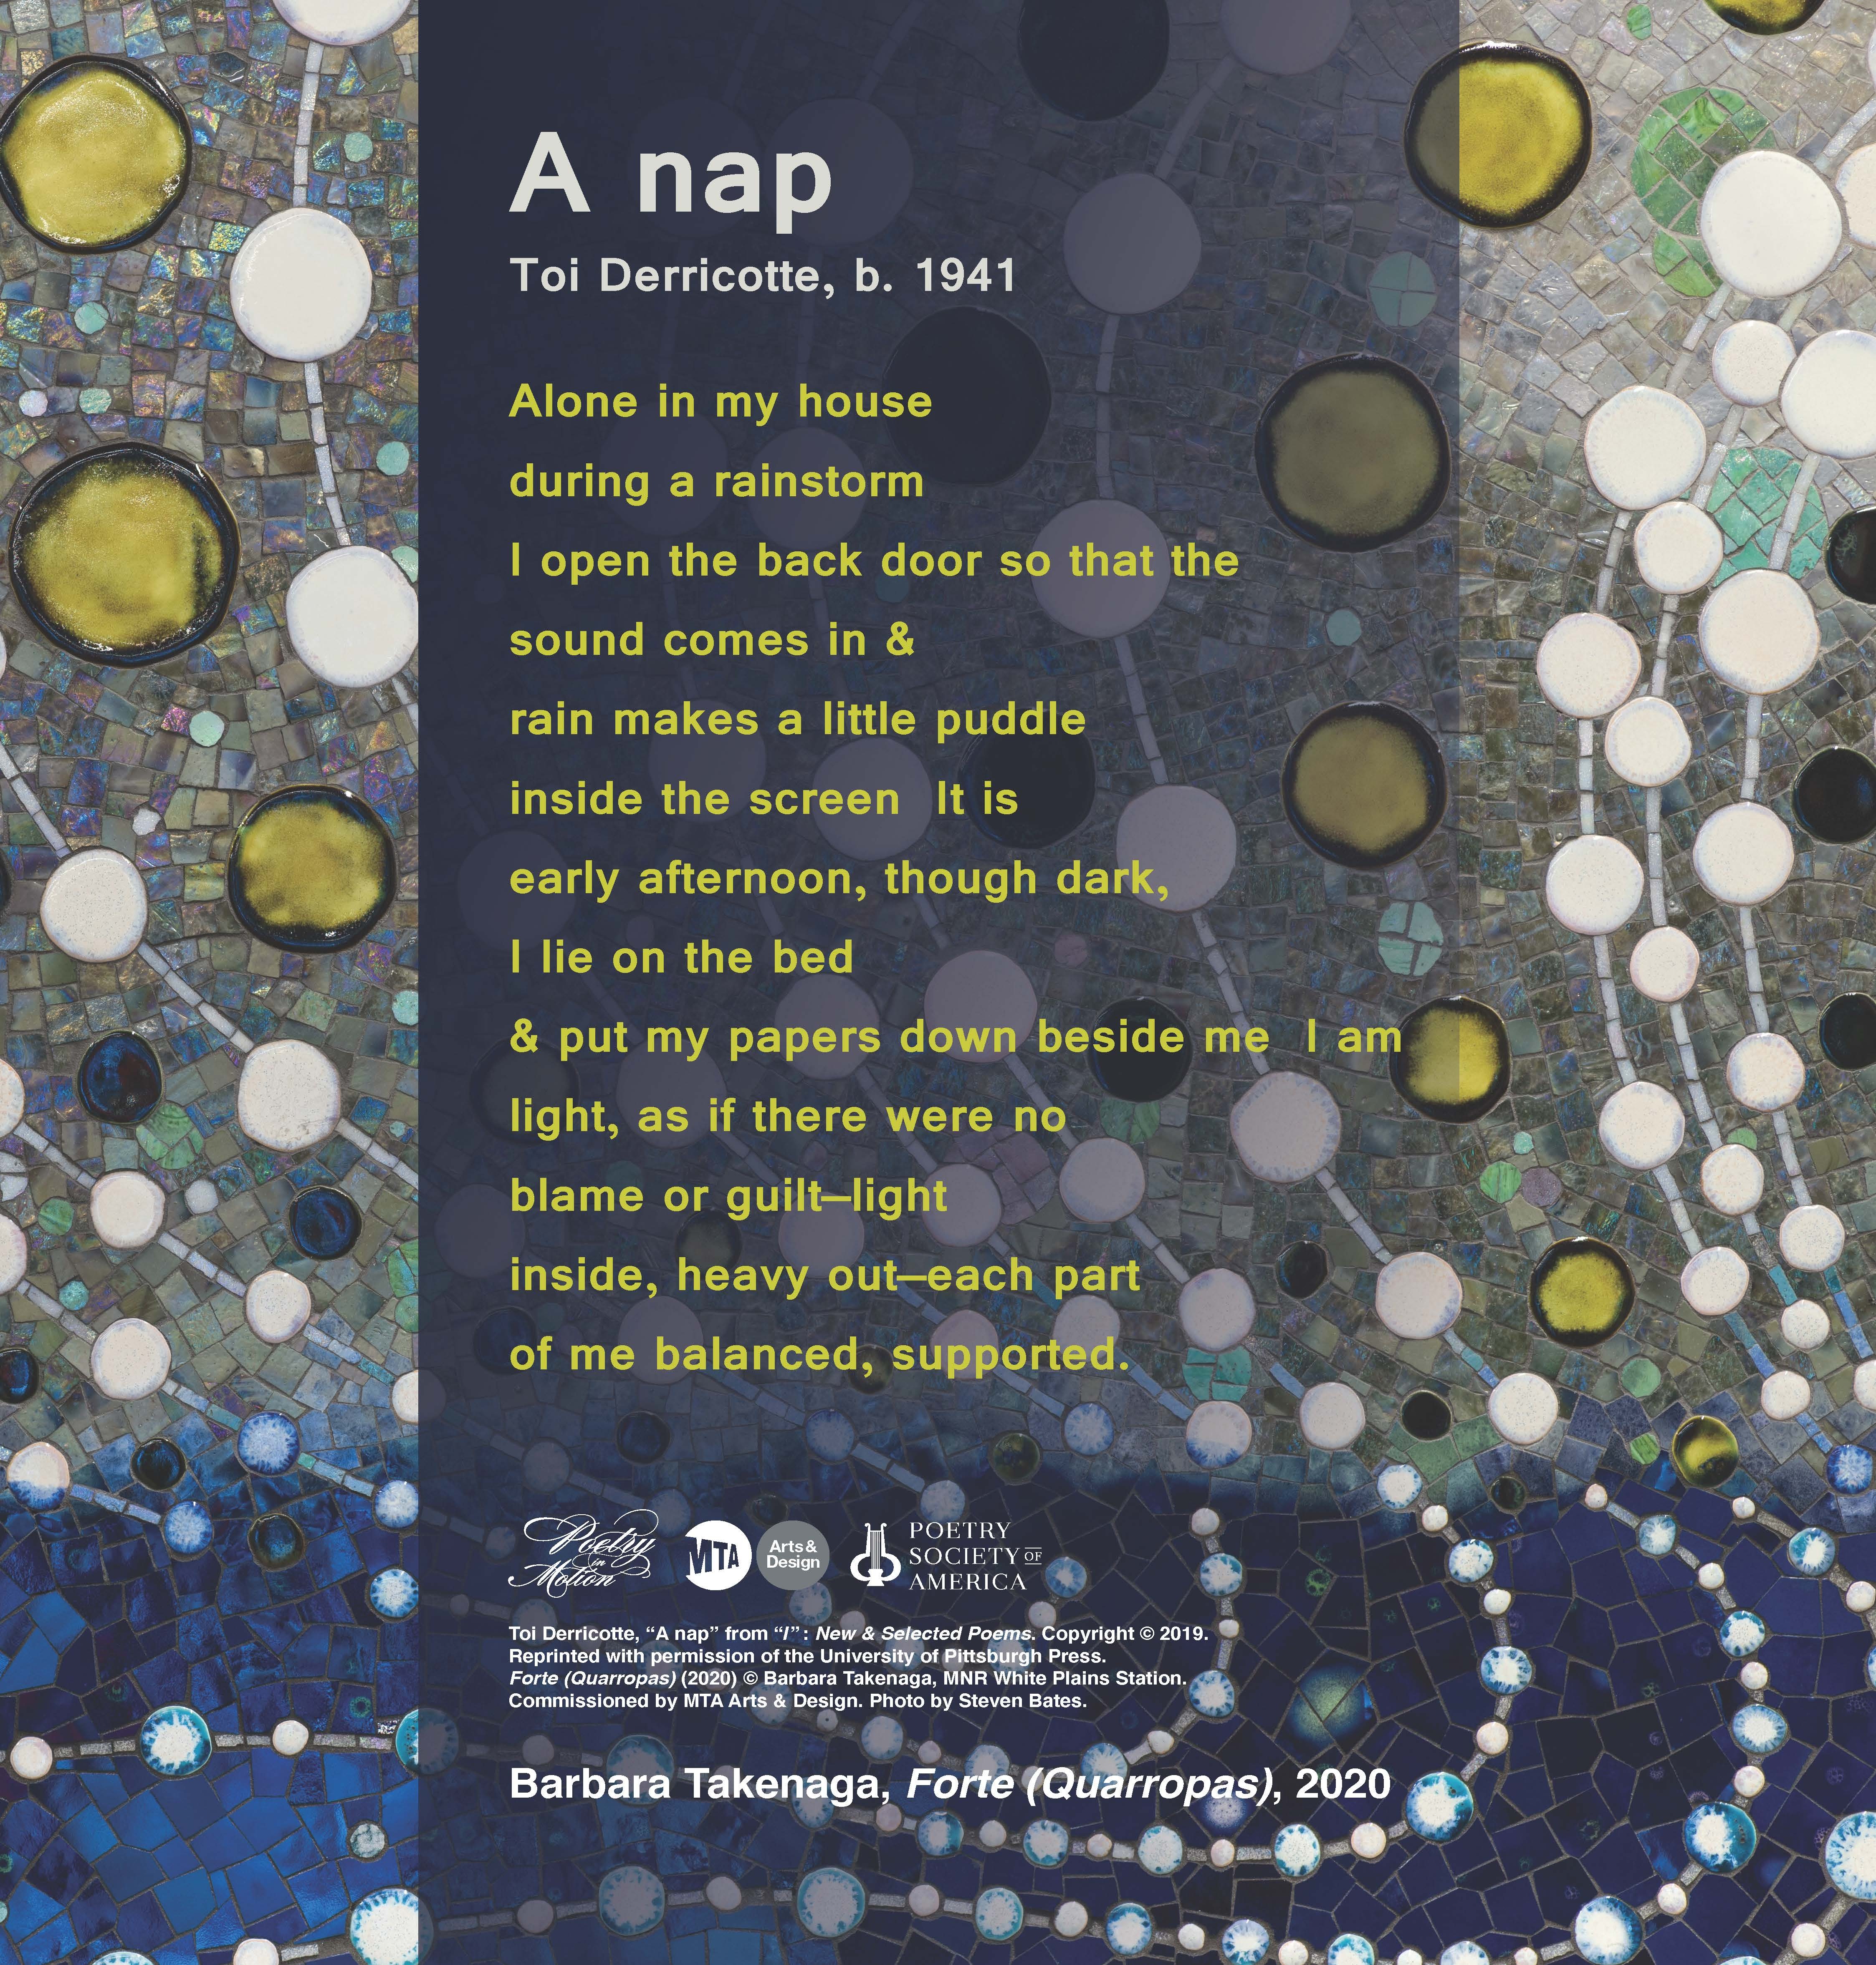 A poster with art by Barbara Takenaga depicts a kaleidoscopic composition of yellow, white, and navy-blue dots and lines. The poem, A nap by Toi Derricotte, is featured in yellow text.